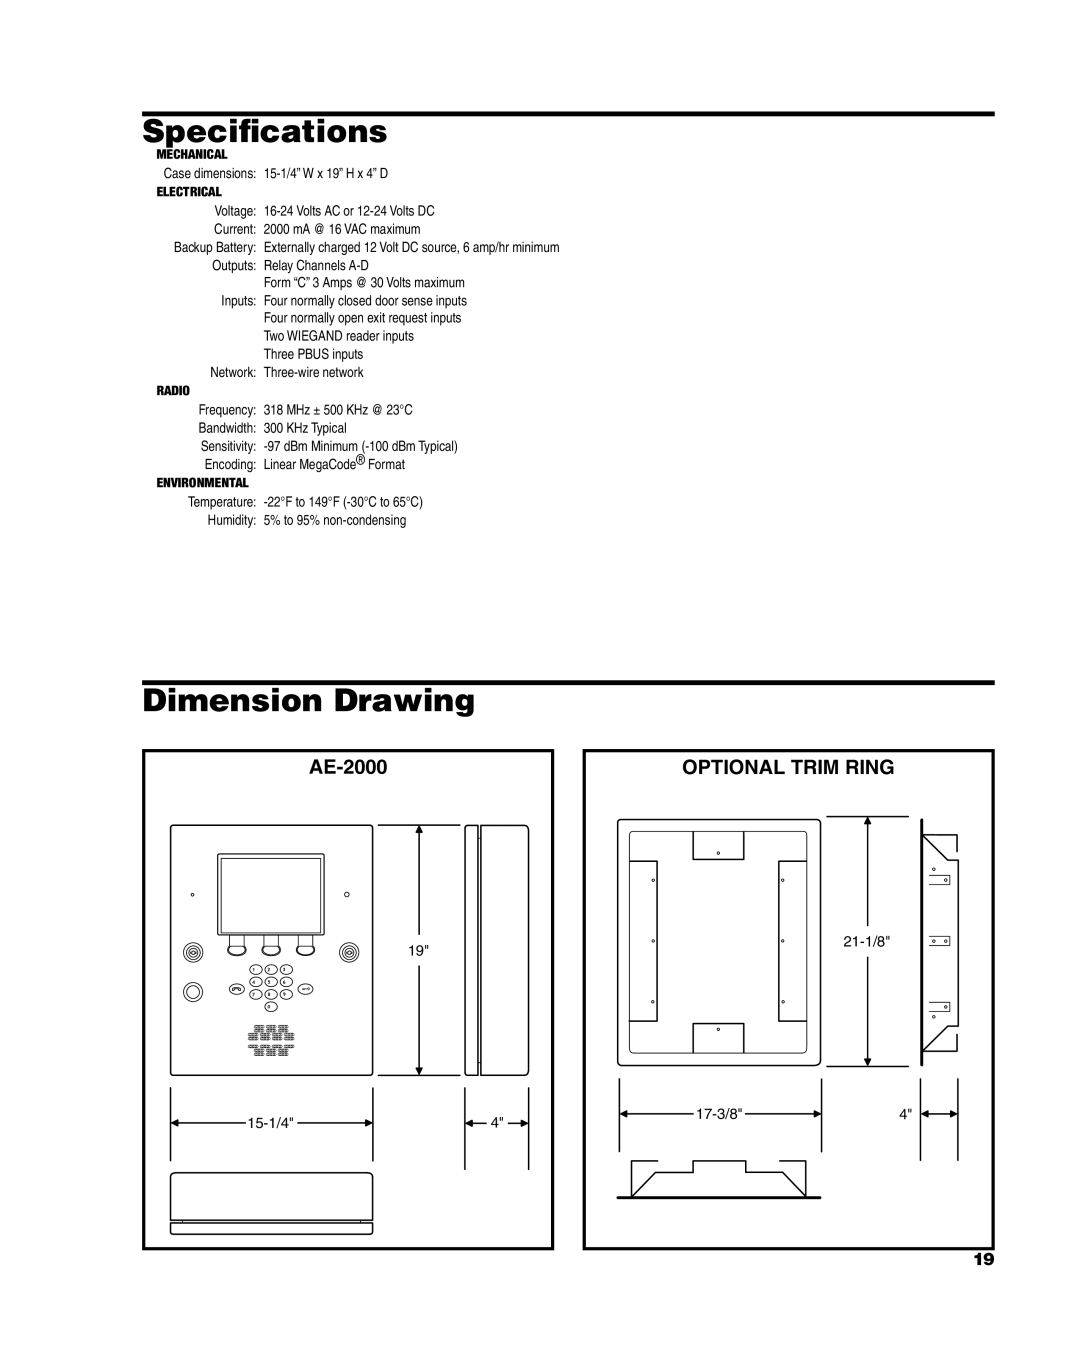 Linear AE-2000 installation instructions Speciﬁcations, Dimension Drawing, Optional Trim Ring 